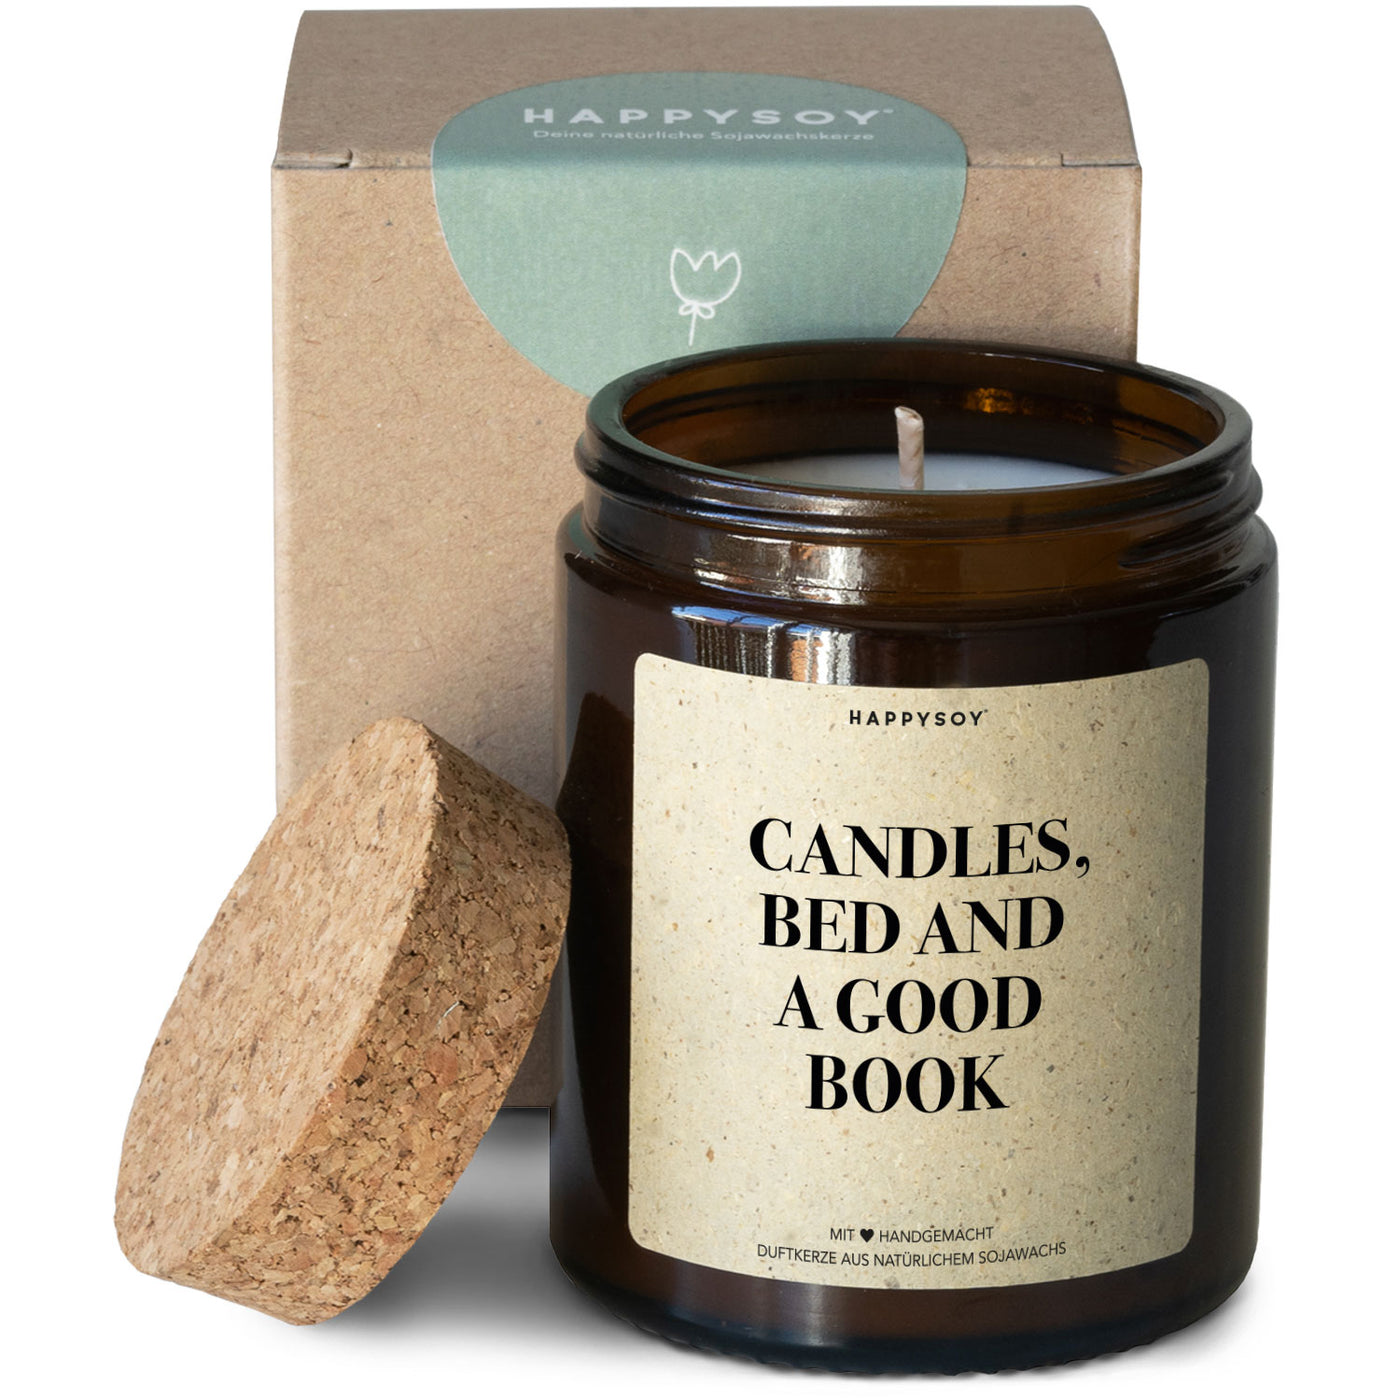 sojawachs-duftkerze-apothekerglas-candles-bed-and-a-good-book